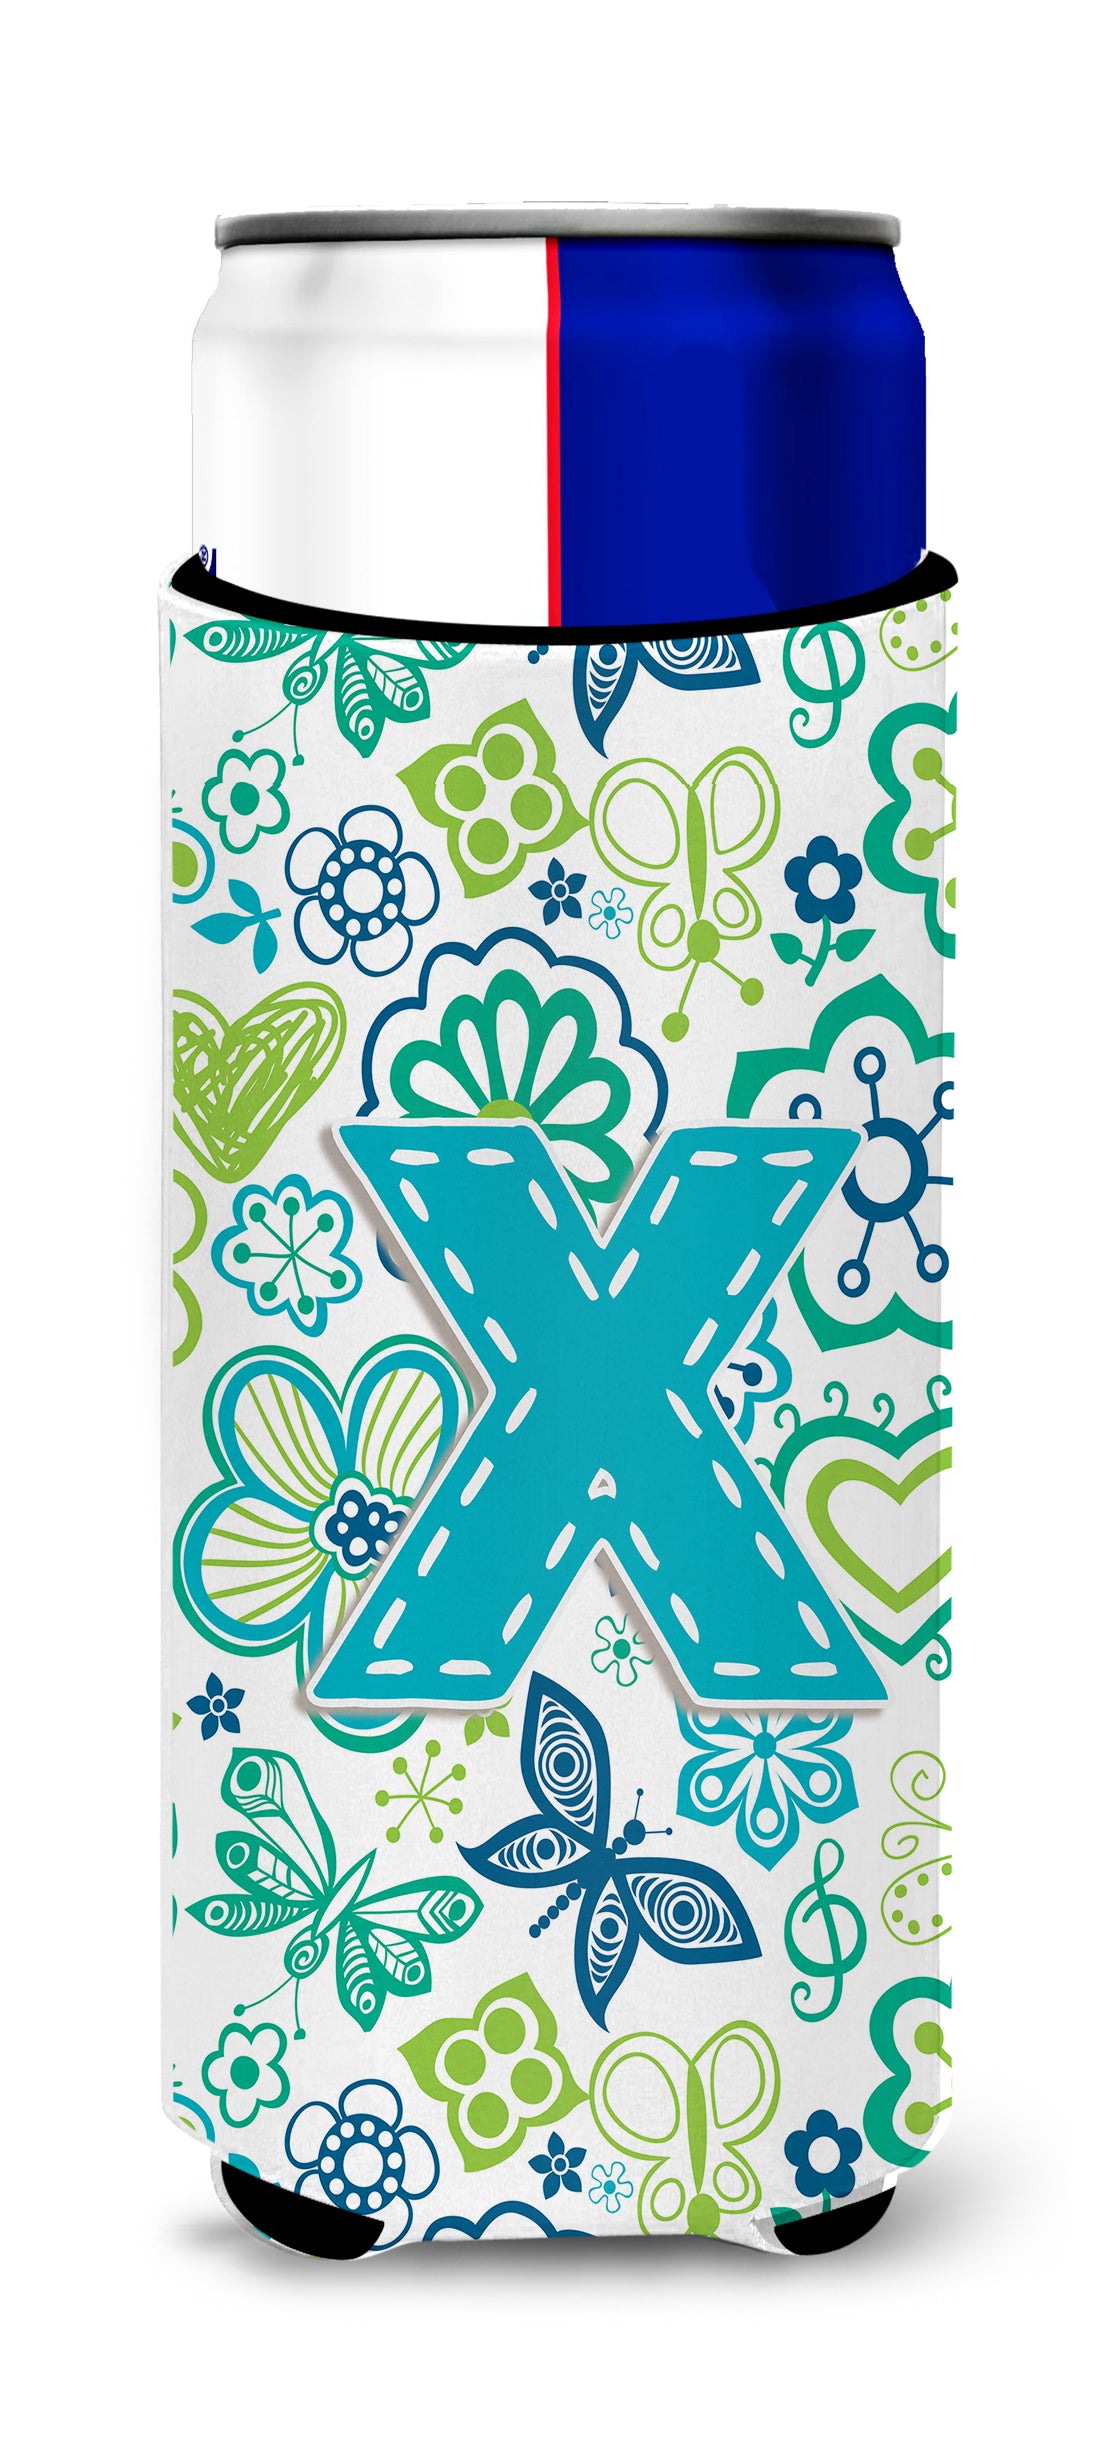 Letter X Flowers and Butterflies Teal Blue Ultra Beverage Insulators for slim cans CJ2006-XMUK.